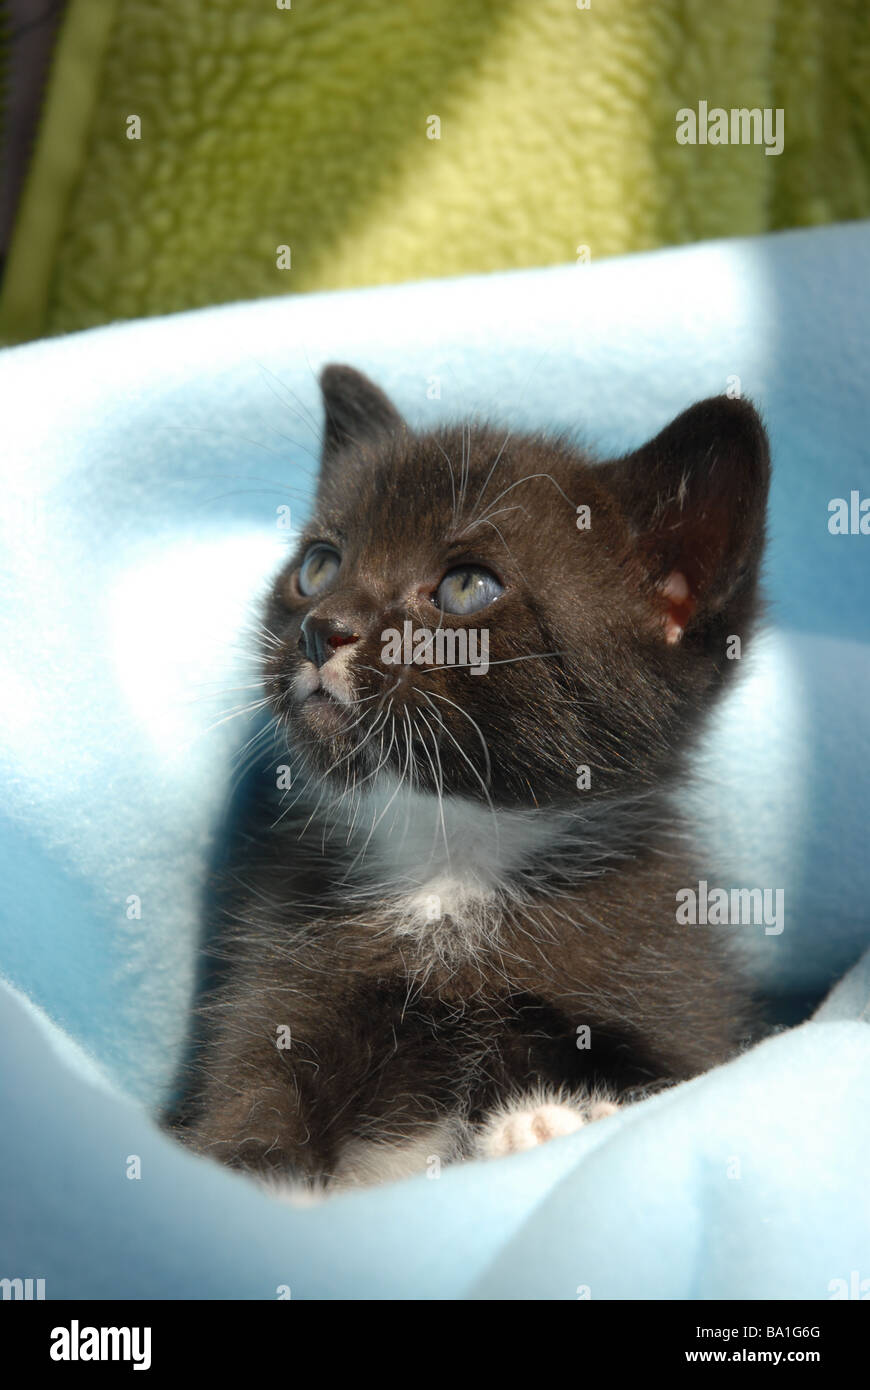 black and white kitten, 5 weeks old Stock Photo